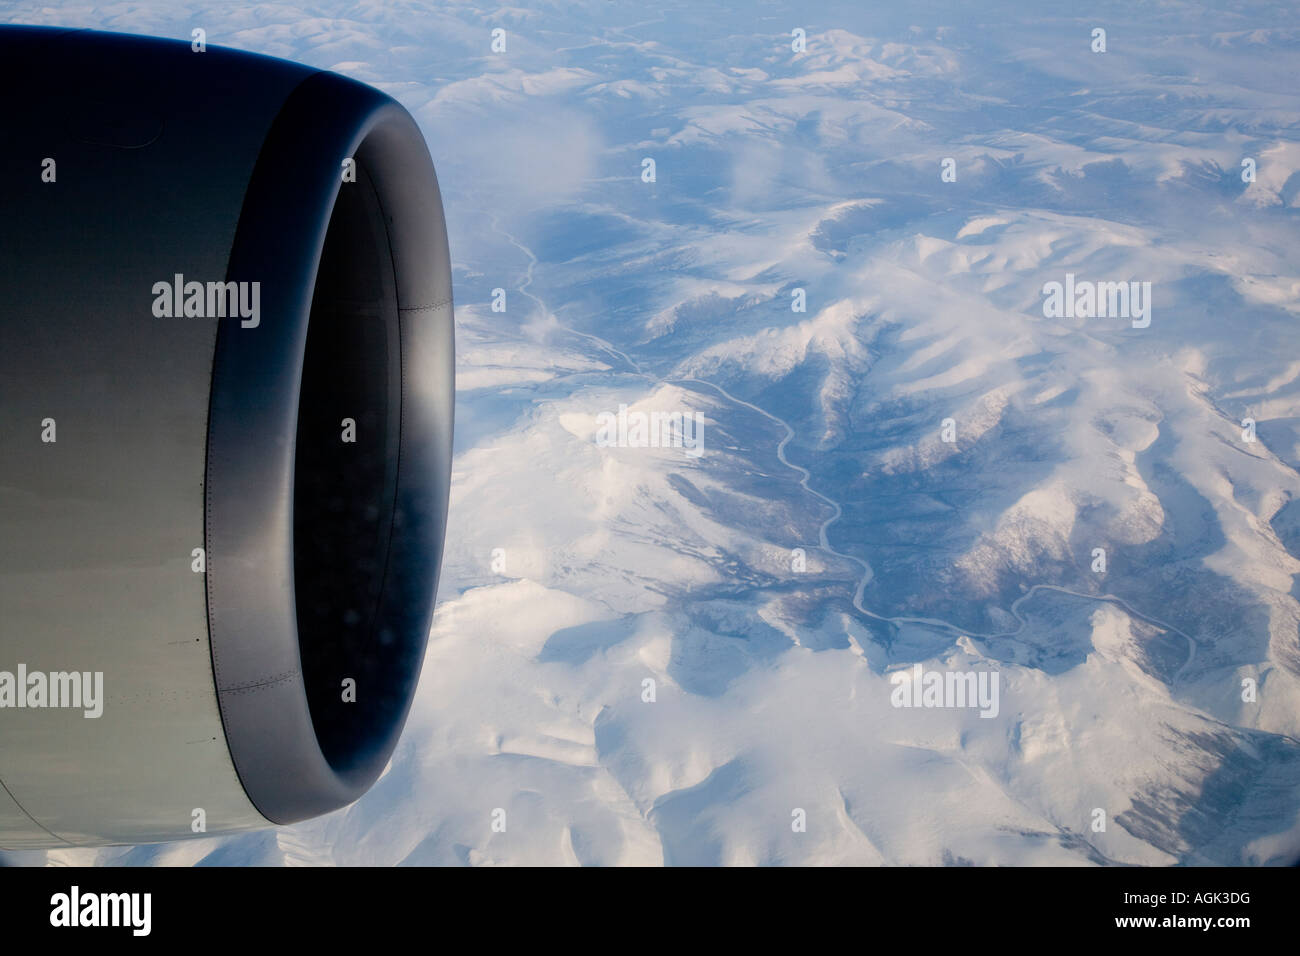 graphic shot of airplane wing and engine against muntain range covered in snow over siberia Stock Photo